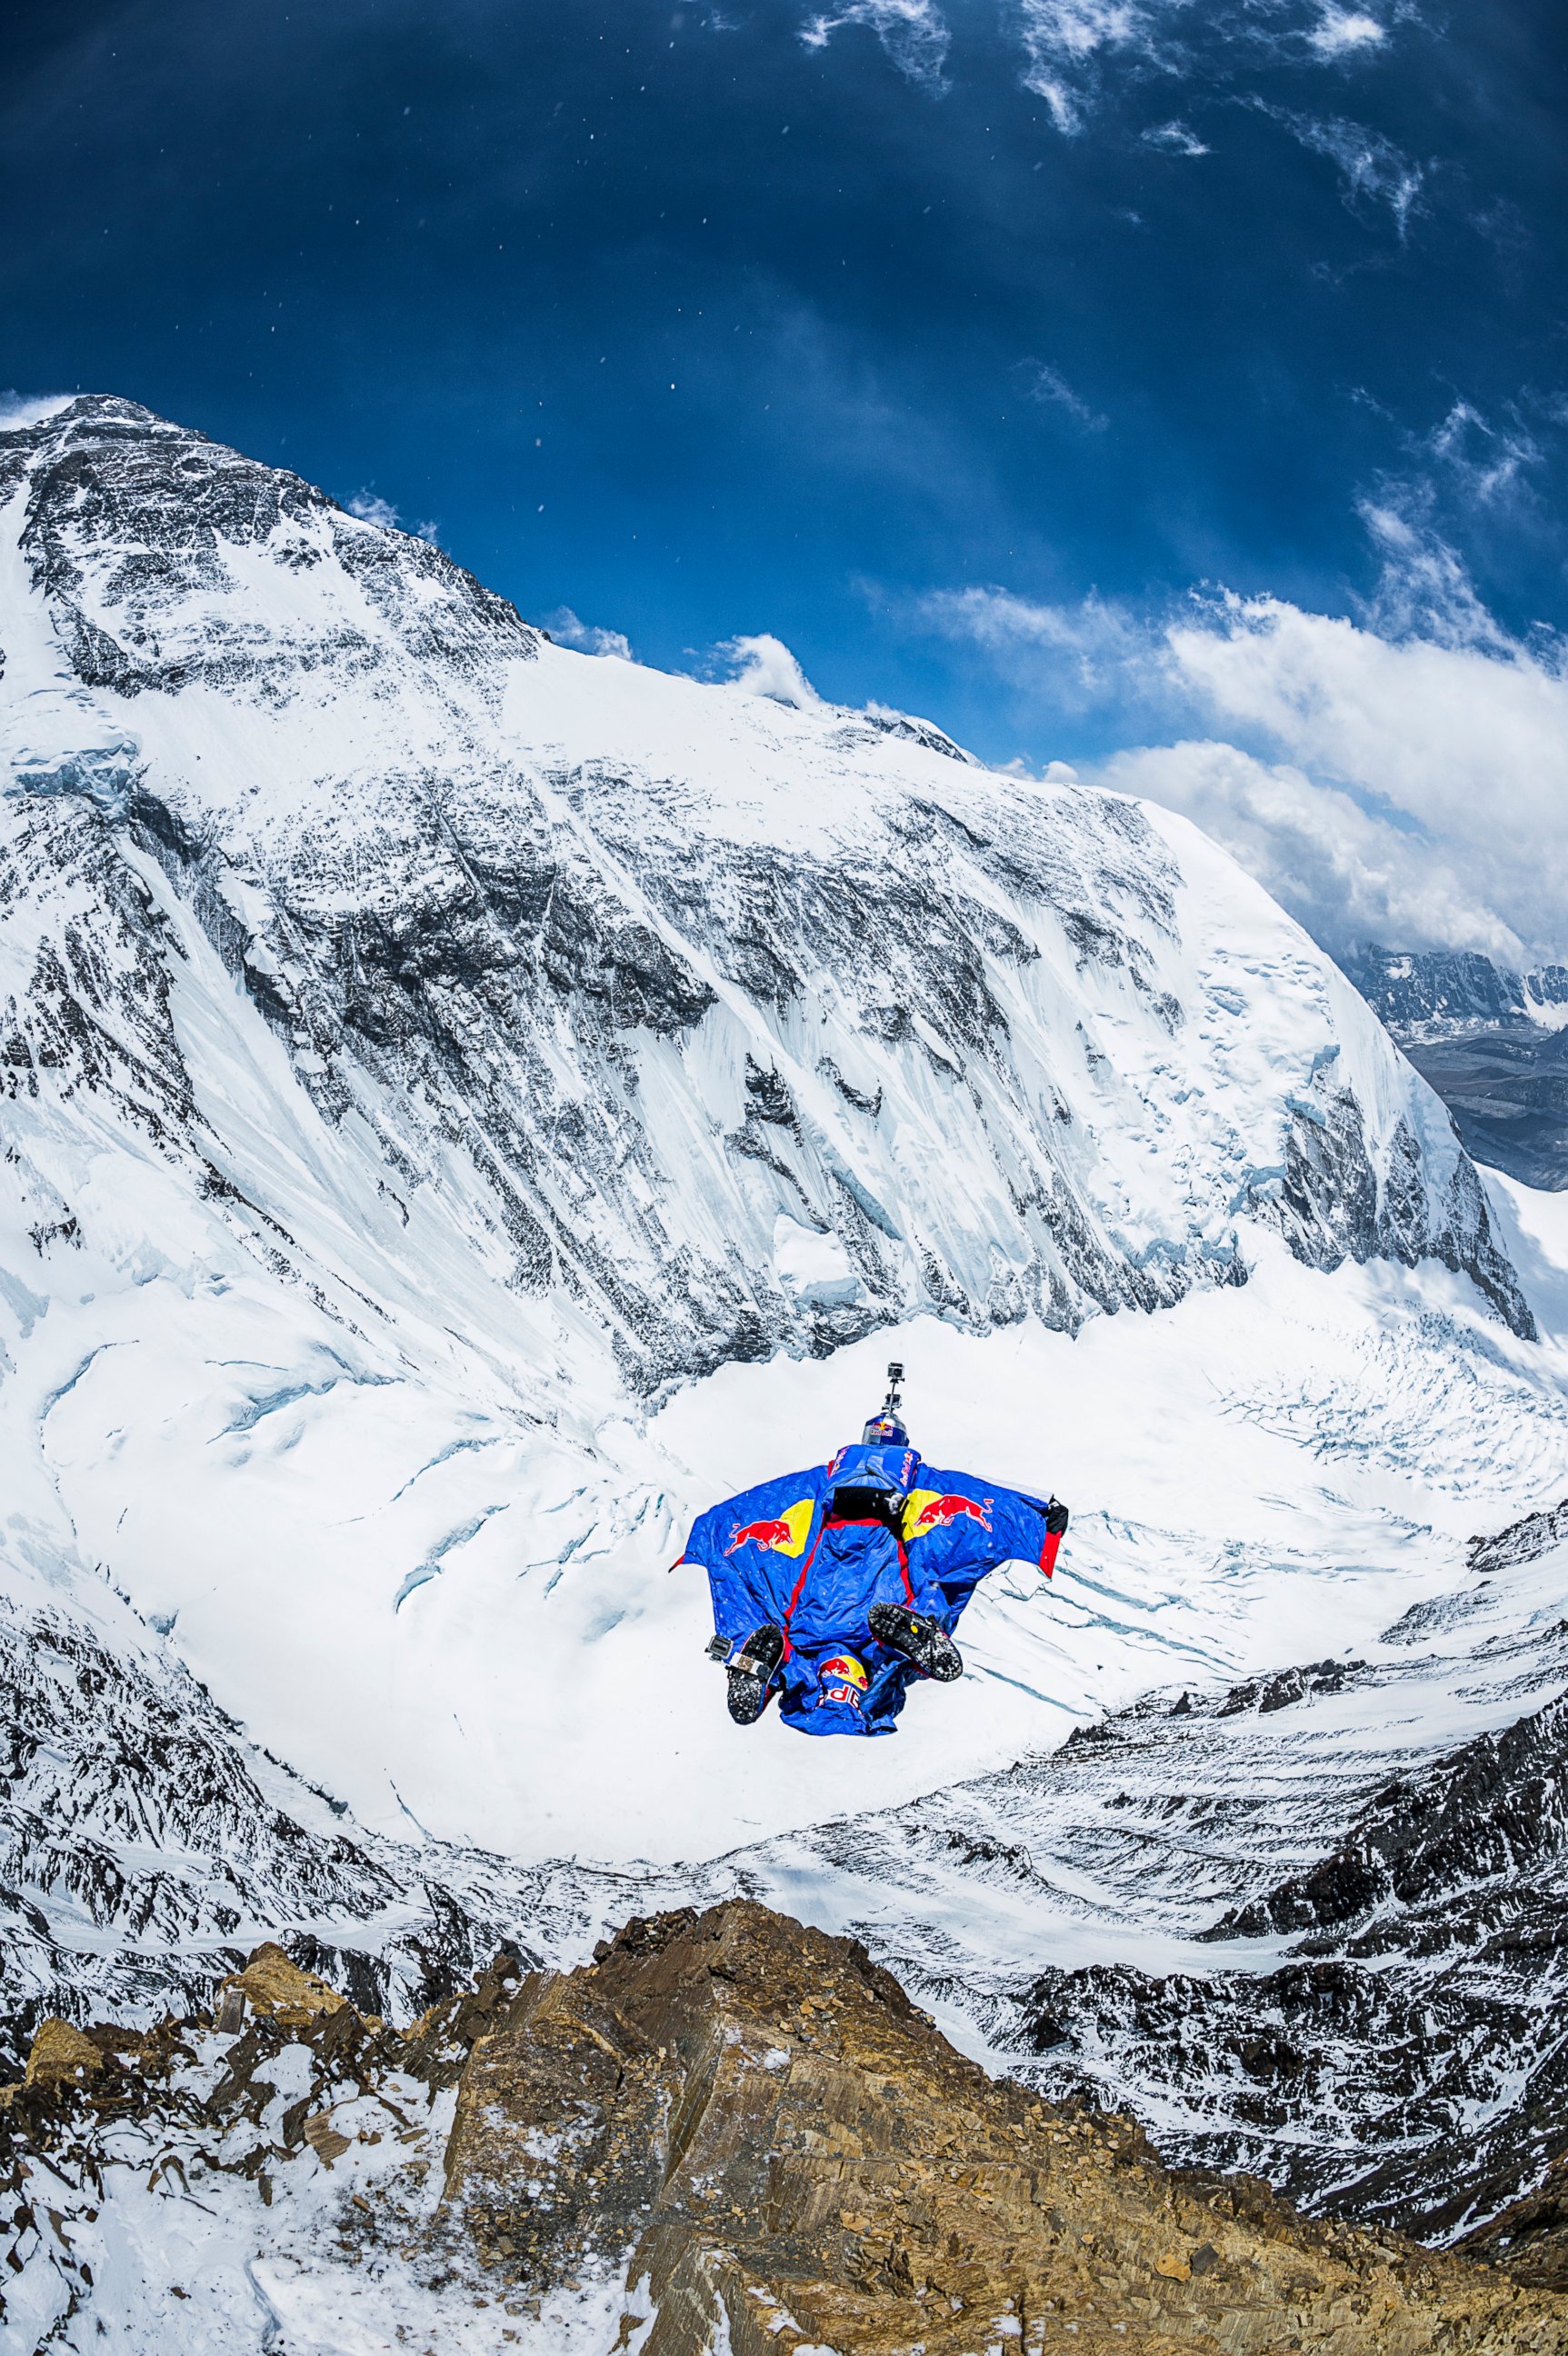 PHOTO: Valery Rozov jumps off the north face of Mount Everest, China on May 5th, 2013.